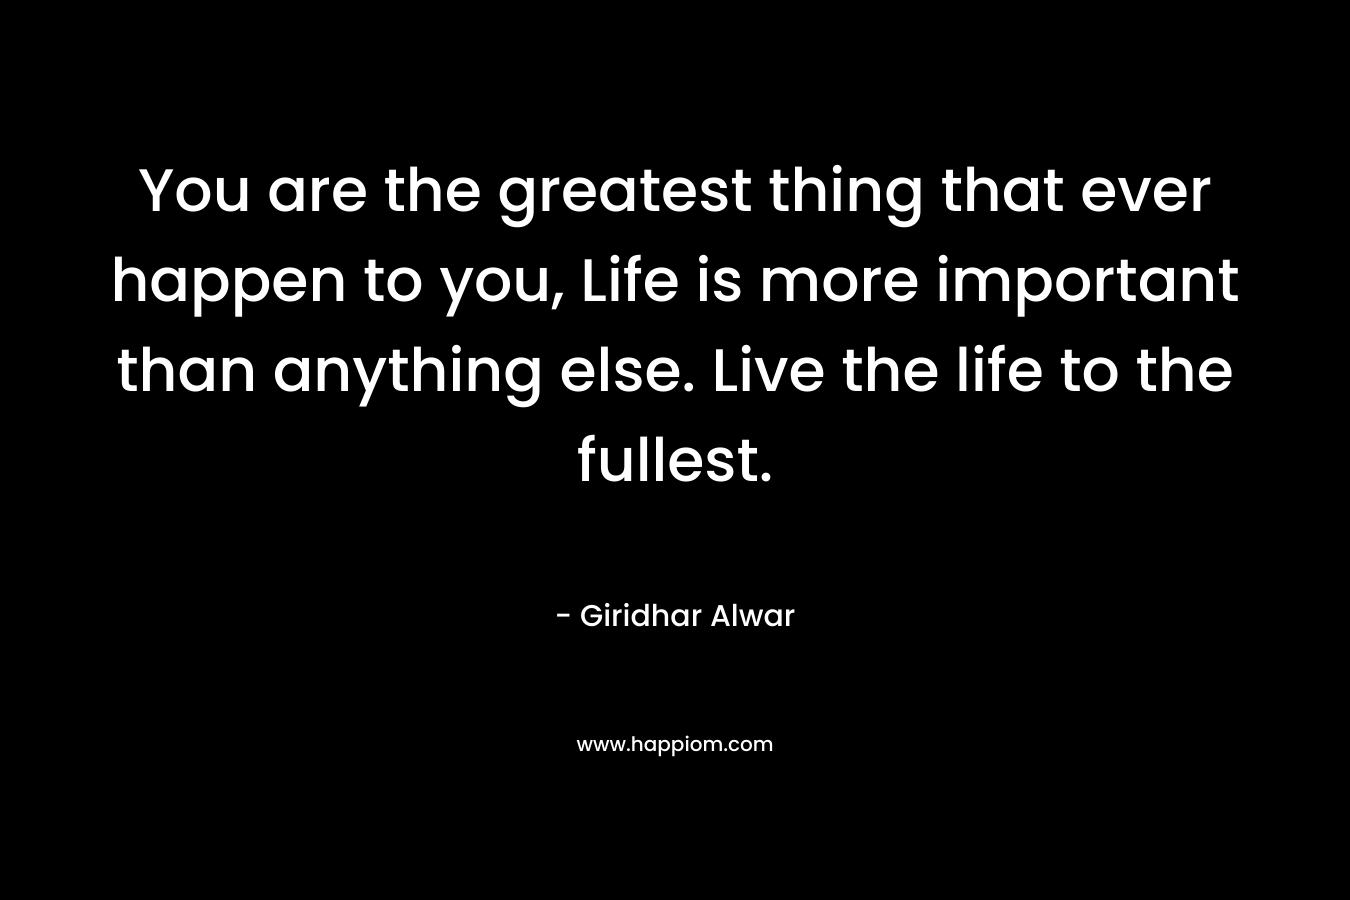 You are the greatest thing that ever happen to you, Life is more important than anything else. Live the life to the fullest.